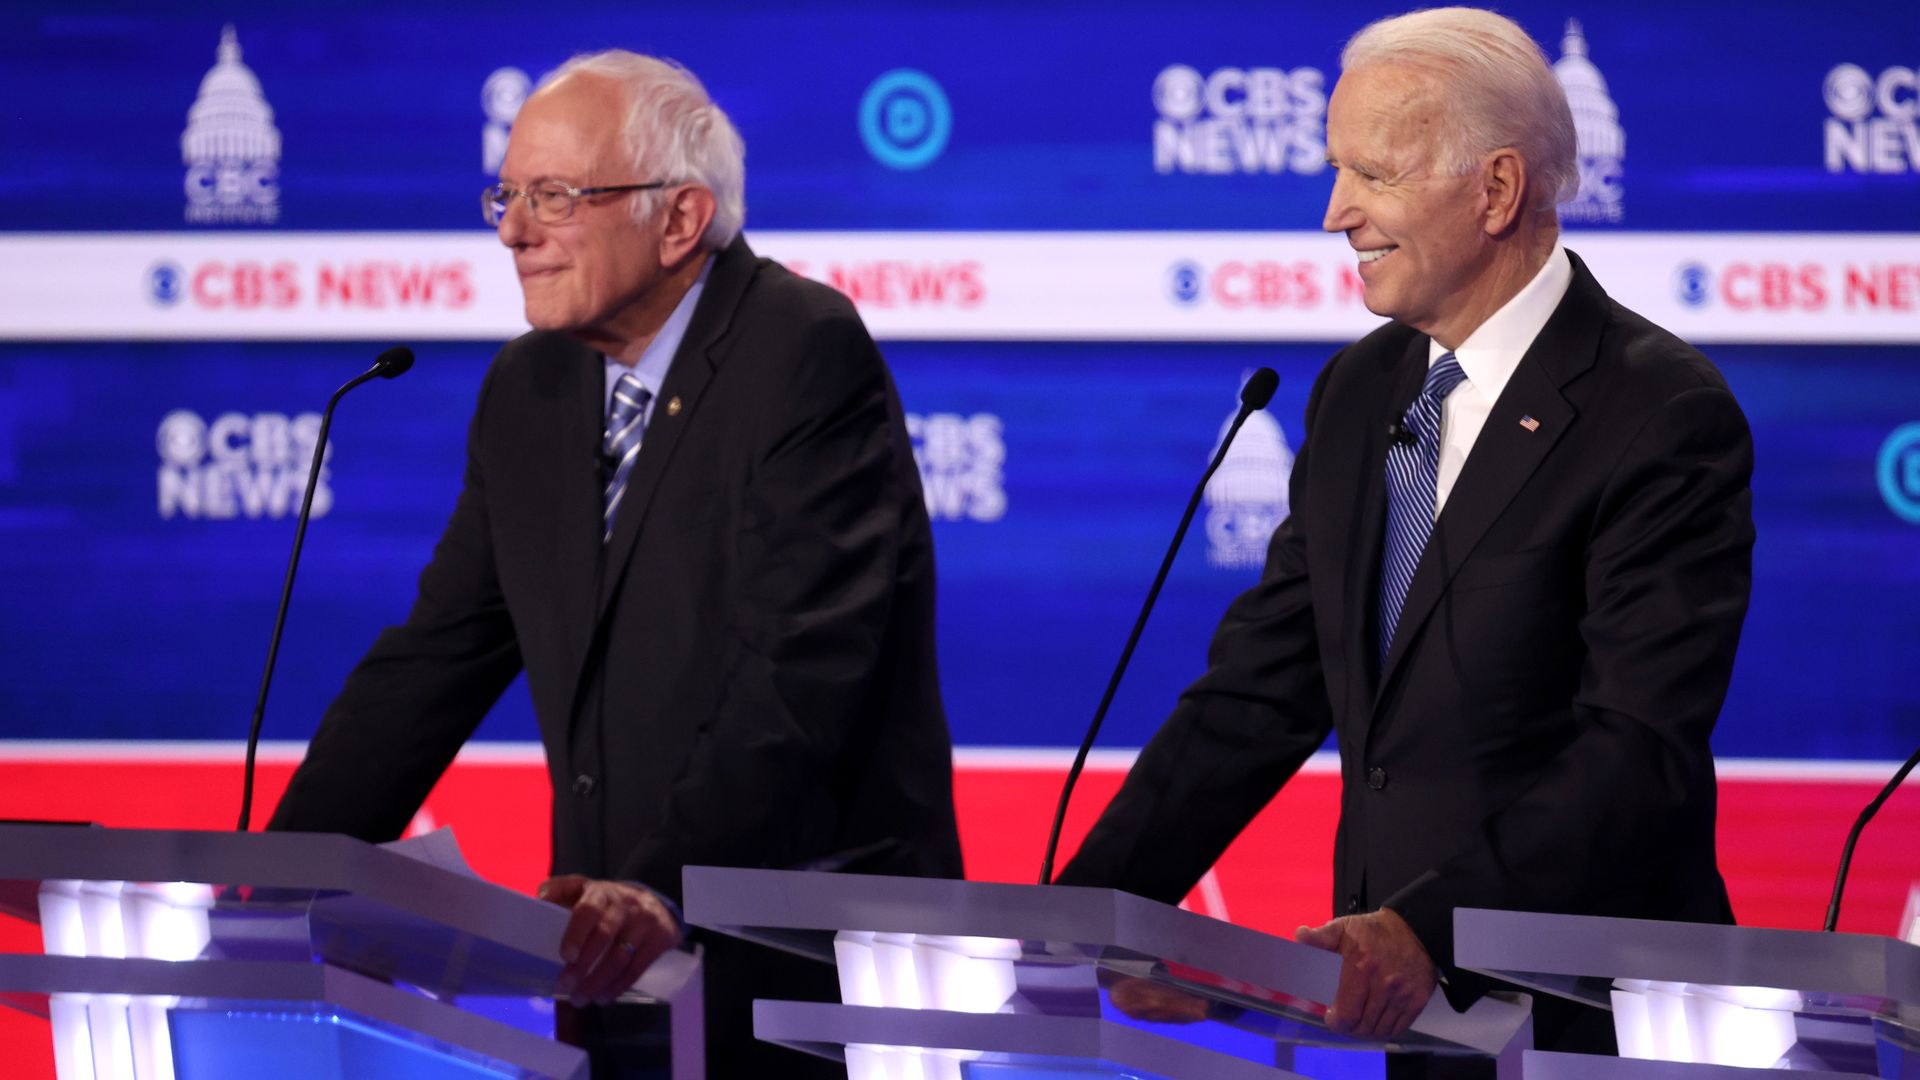 In this image, Sanders and Biden stand next to each other on the debate stage.